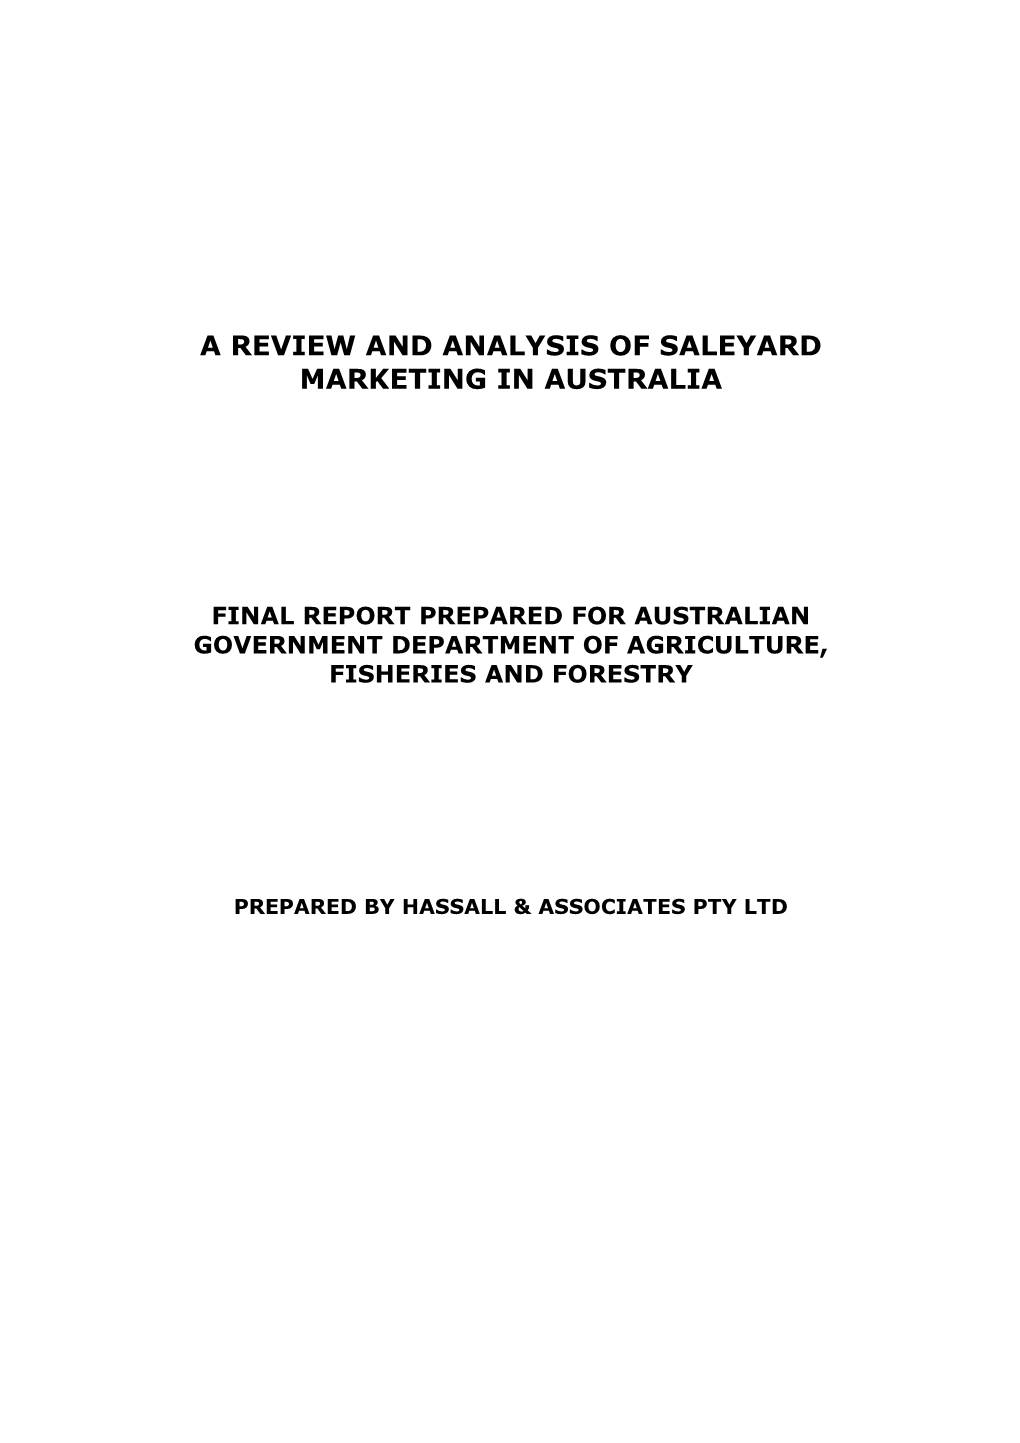 Final Report Prepared for Australian Government Department of Agriculture, Fisheries And